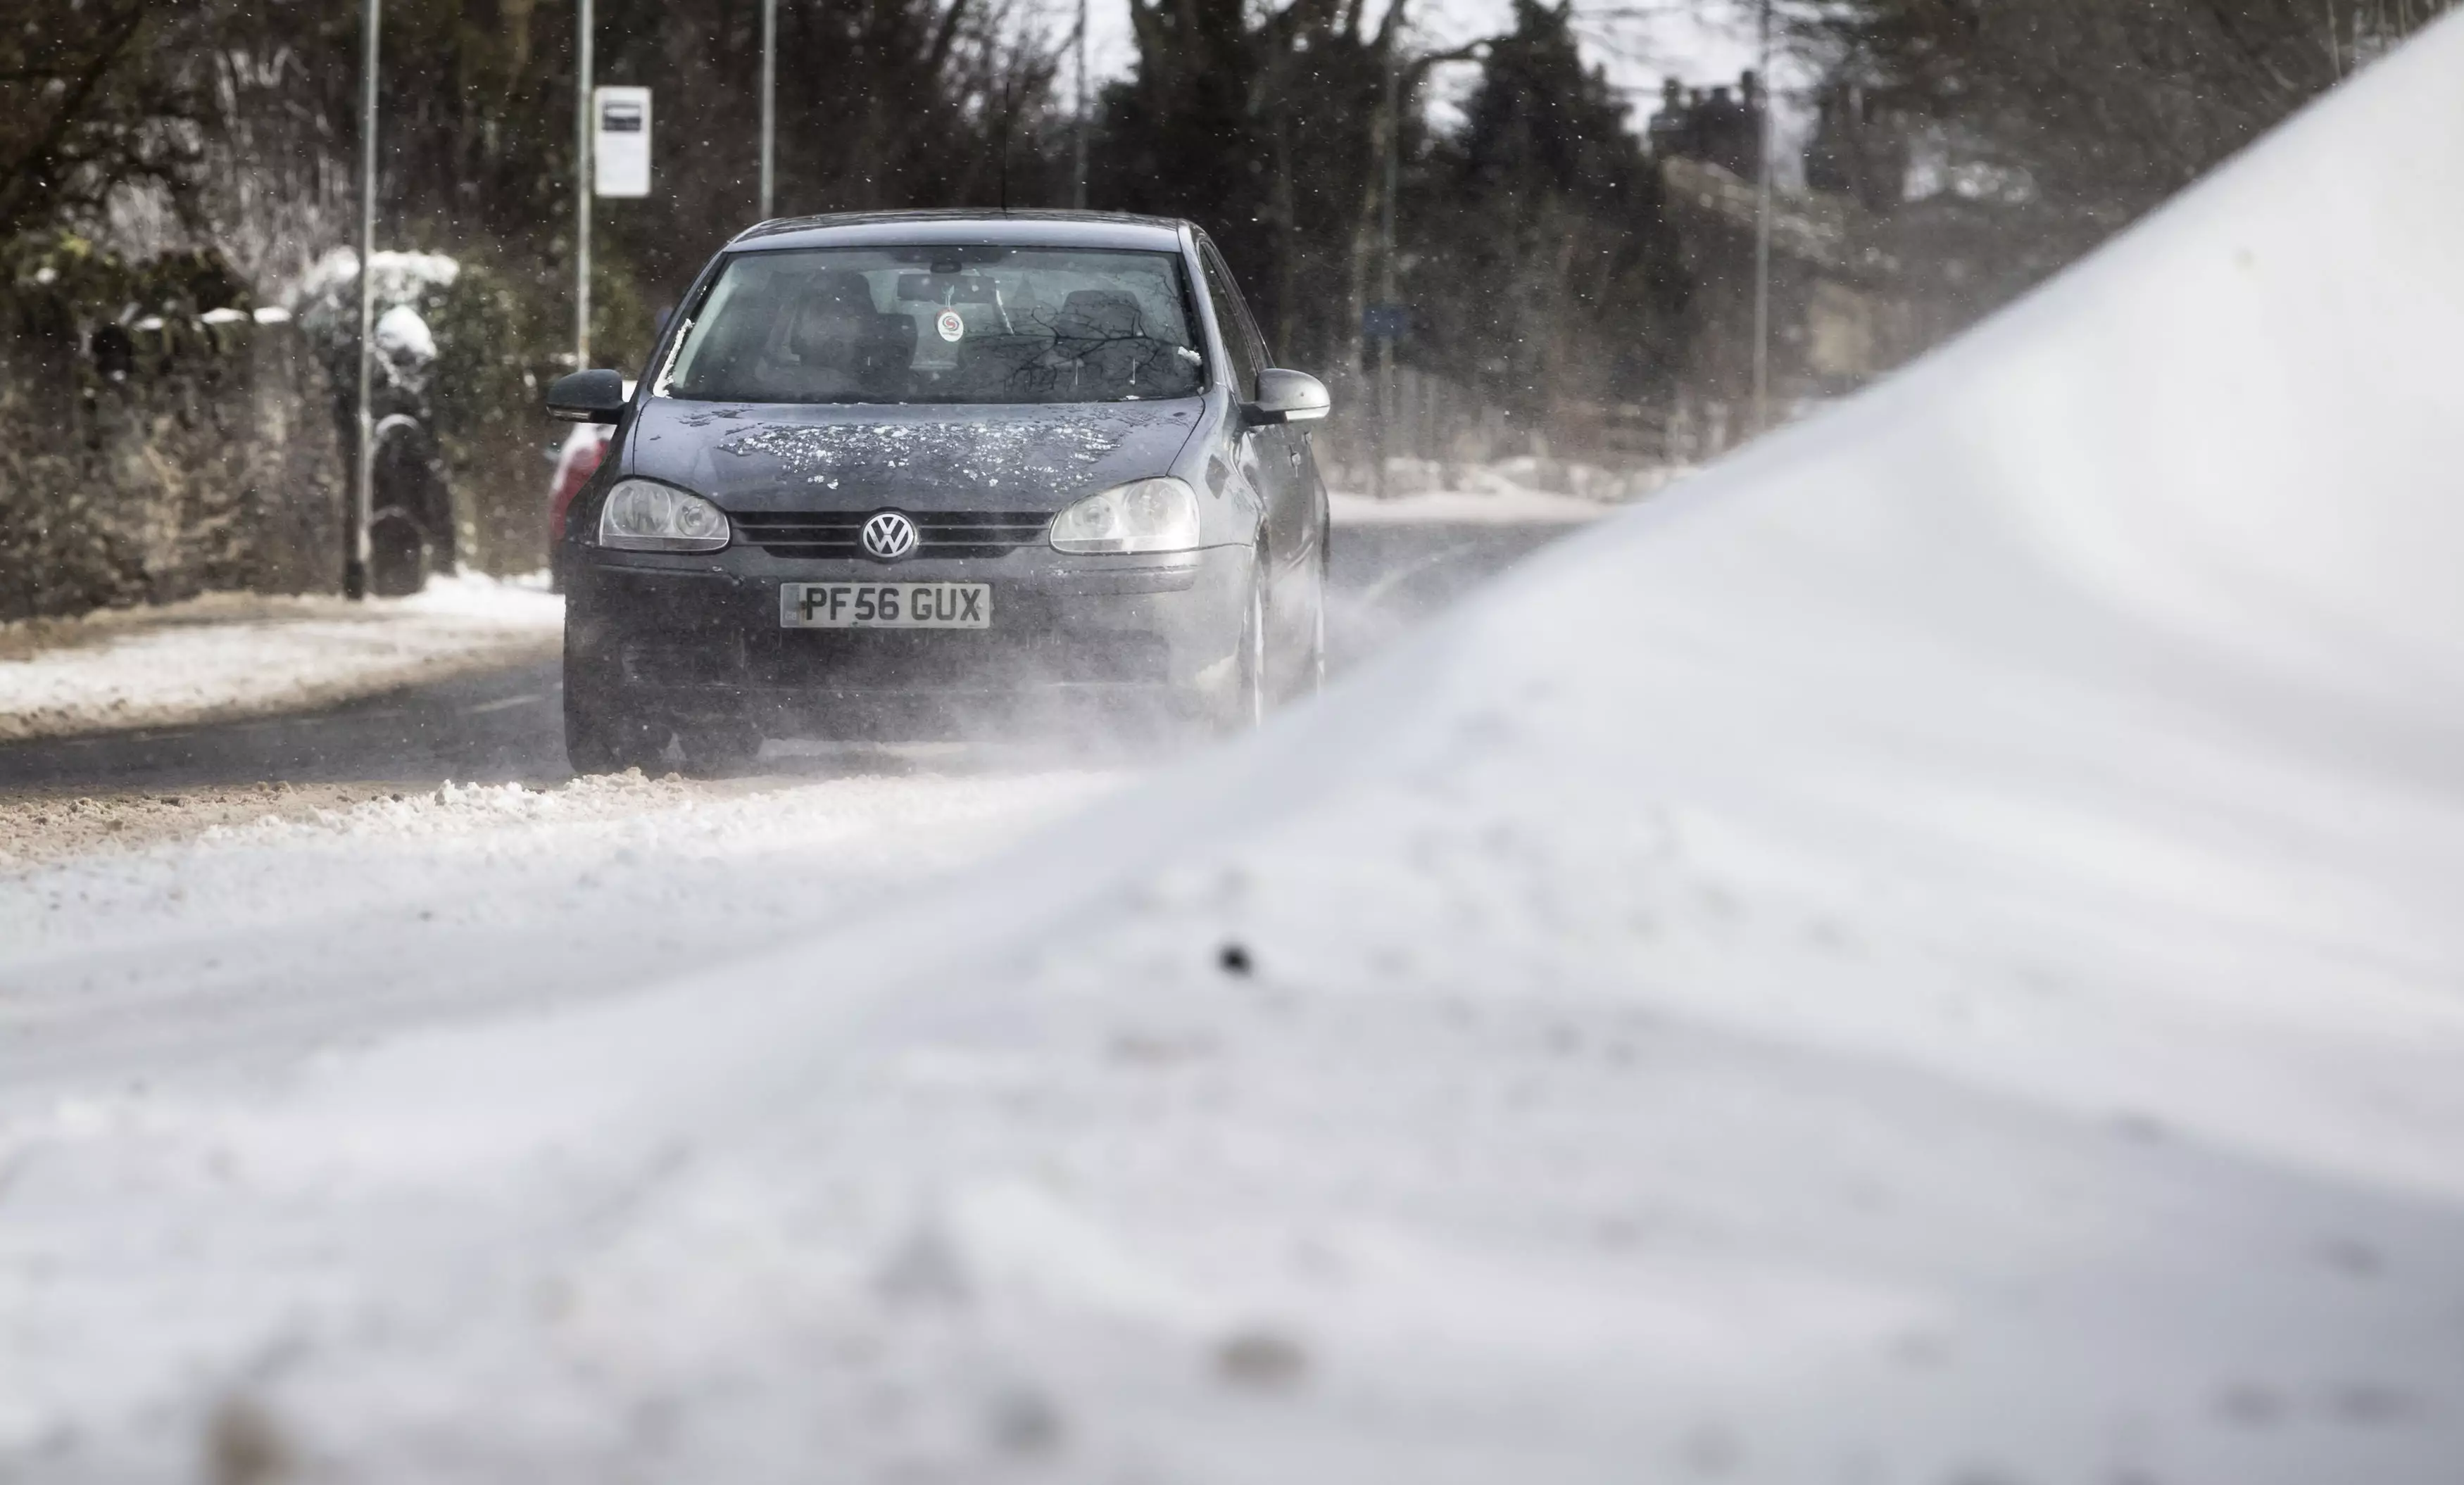 Parts of the UK could get up to 5cm of snow by next week.